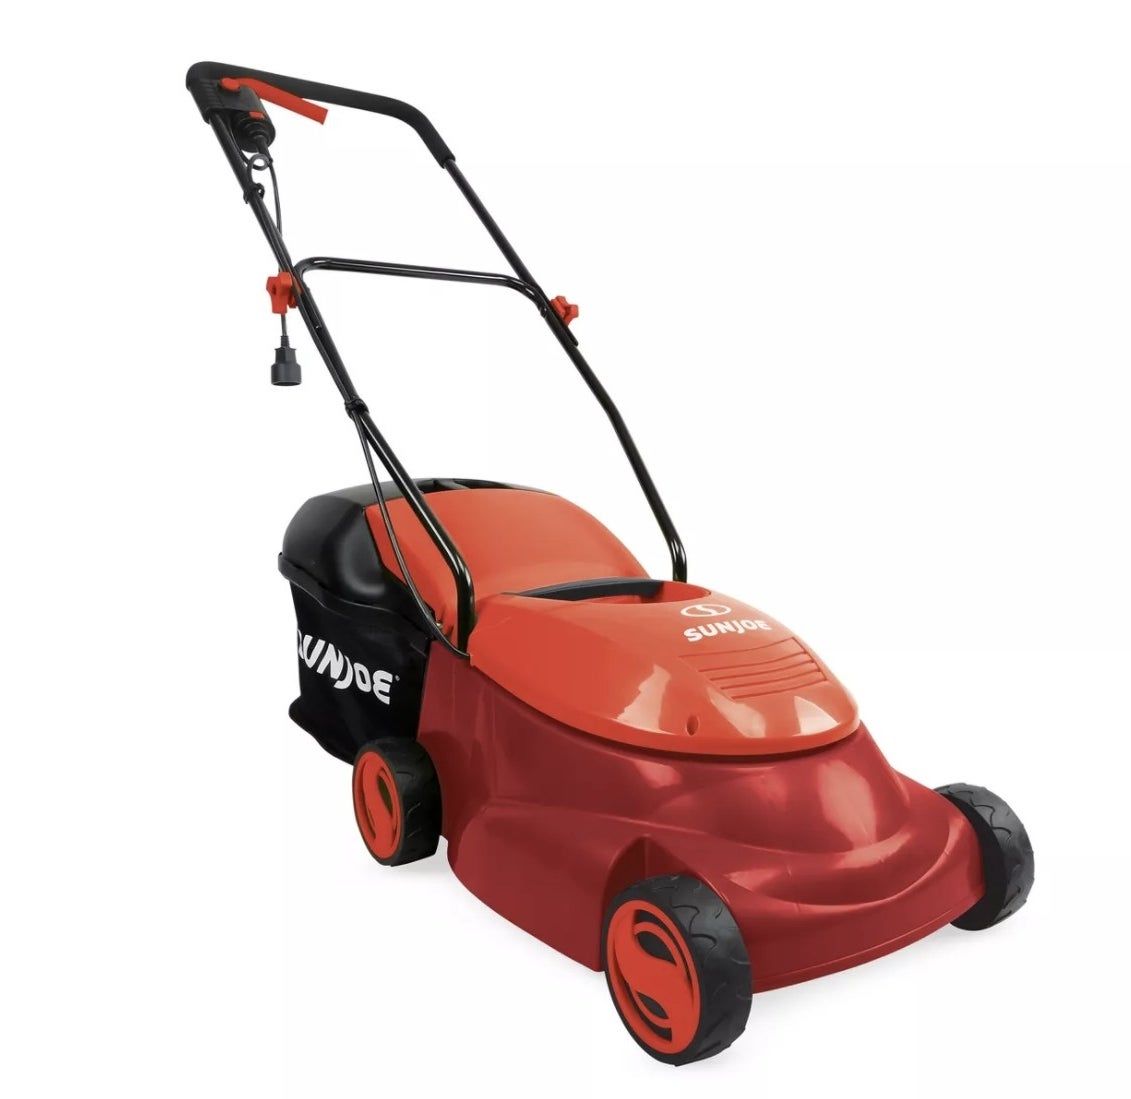 An orange lawnmower with a collapsible handle and a black discharge chute in the back